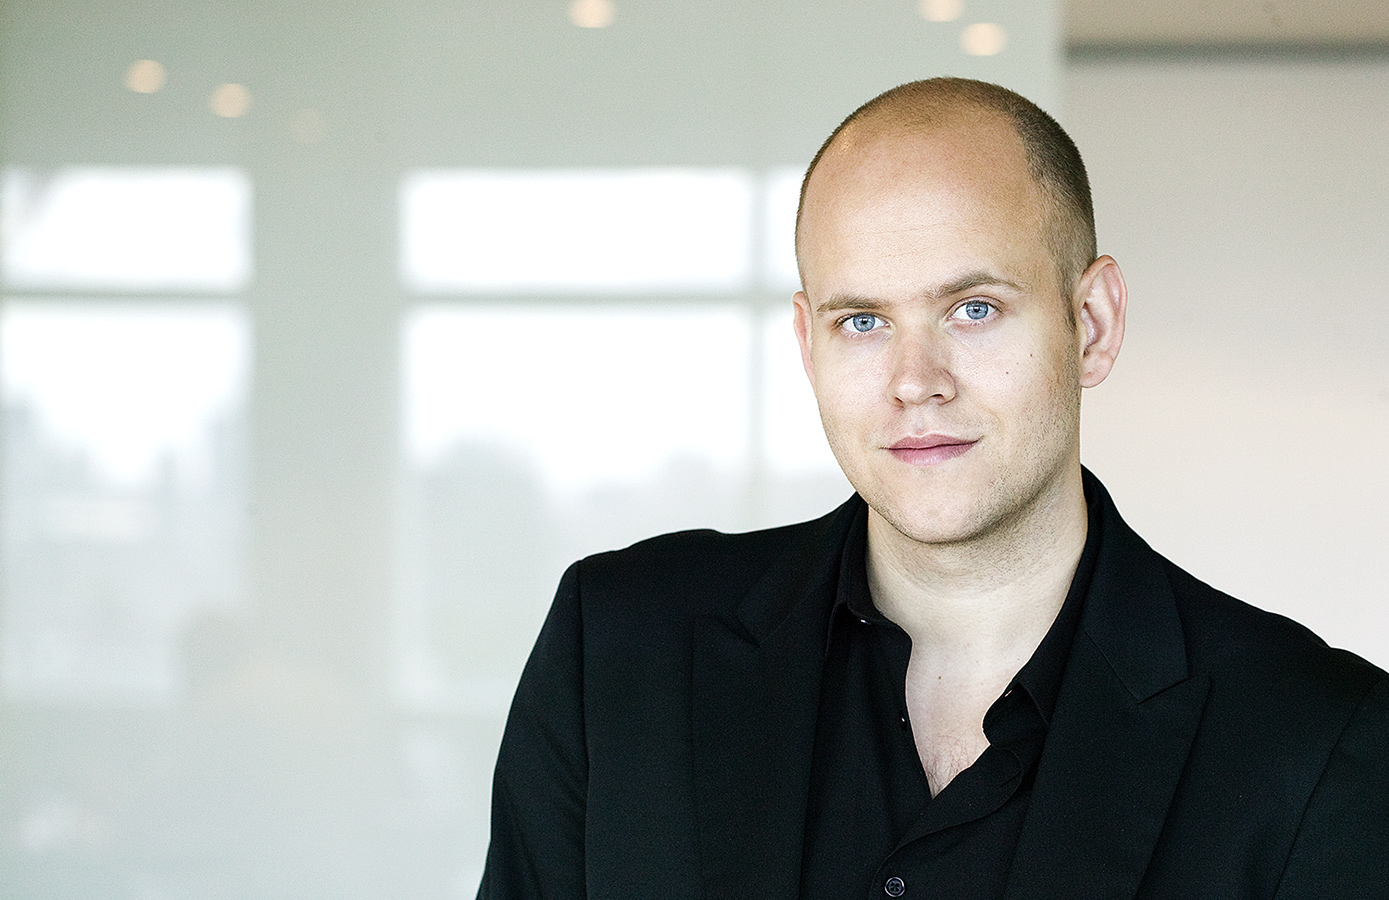 Spotify CEO Daniel Ek Answers Your Questions In Online Q&A Session